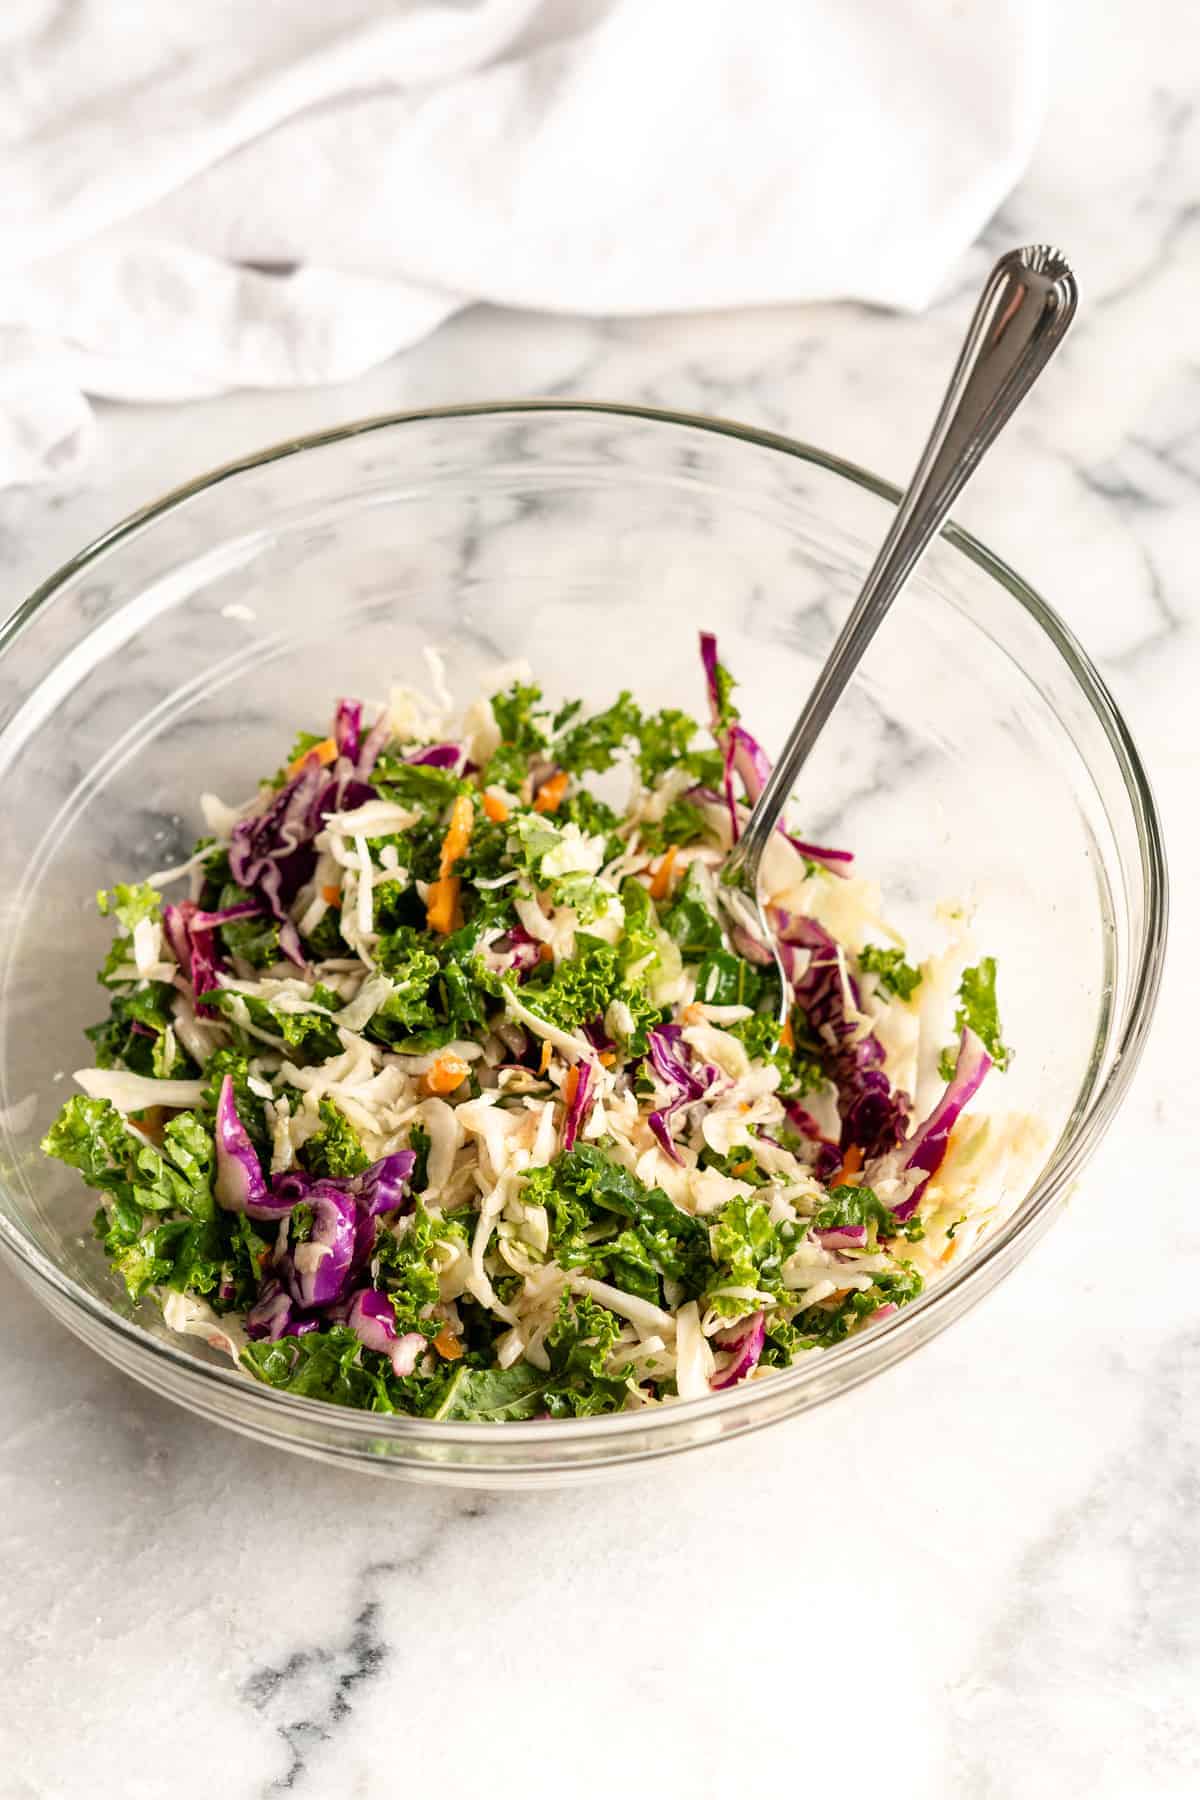 Slaw in glass bowl with spoon